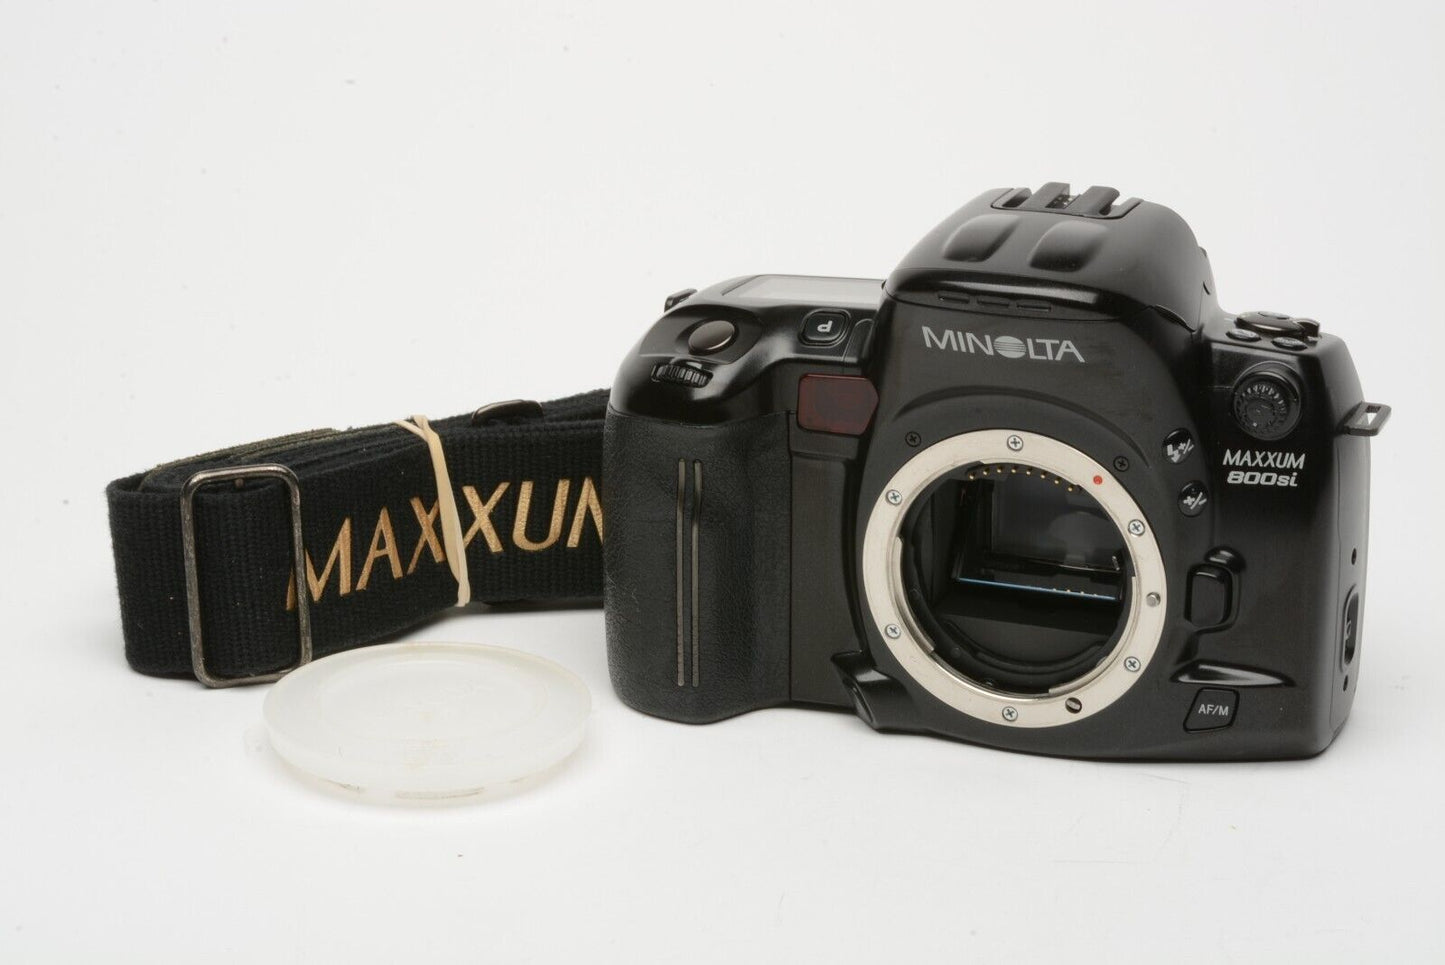 EXC++ MINOLTA MAXXUM 800si 35mm CAMERA BODY ONLY, CAP+STRAP, TESTED, GREAT!